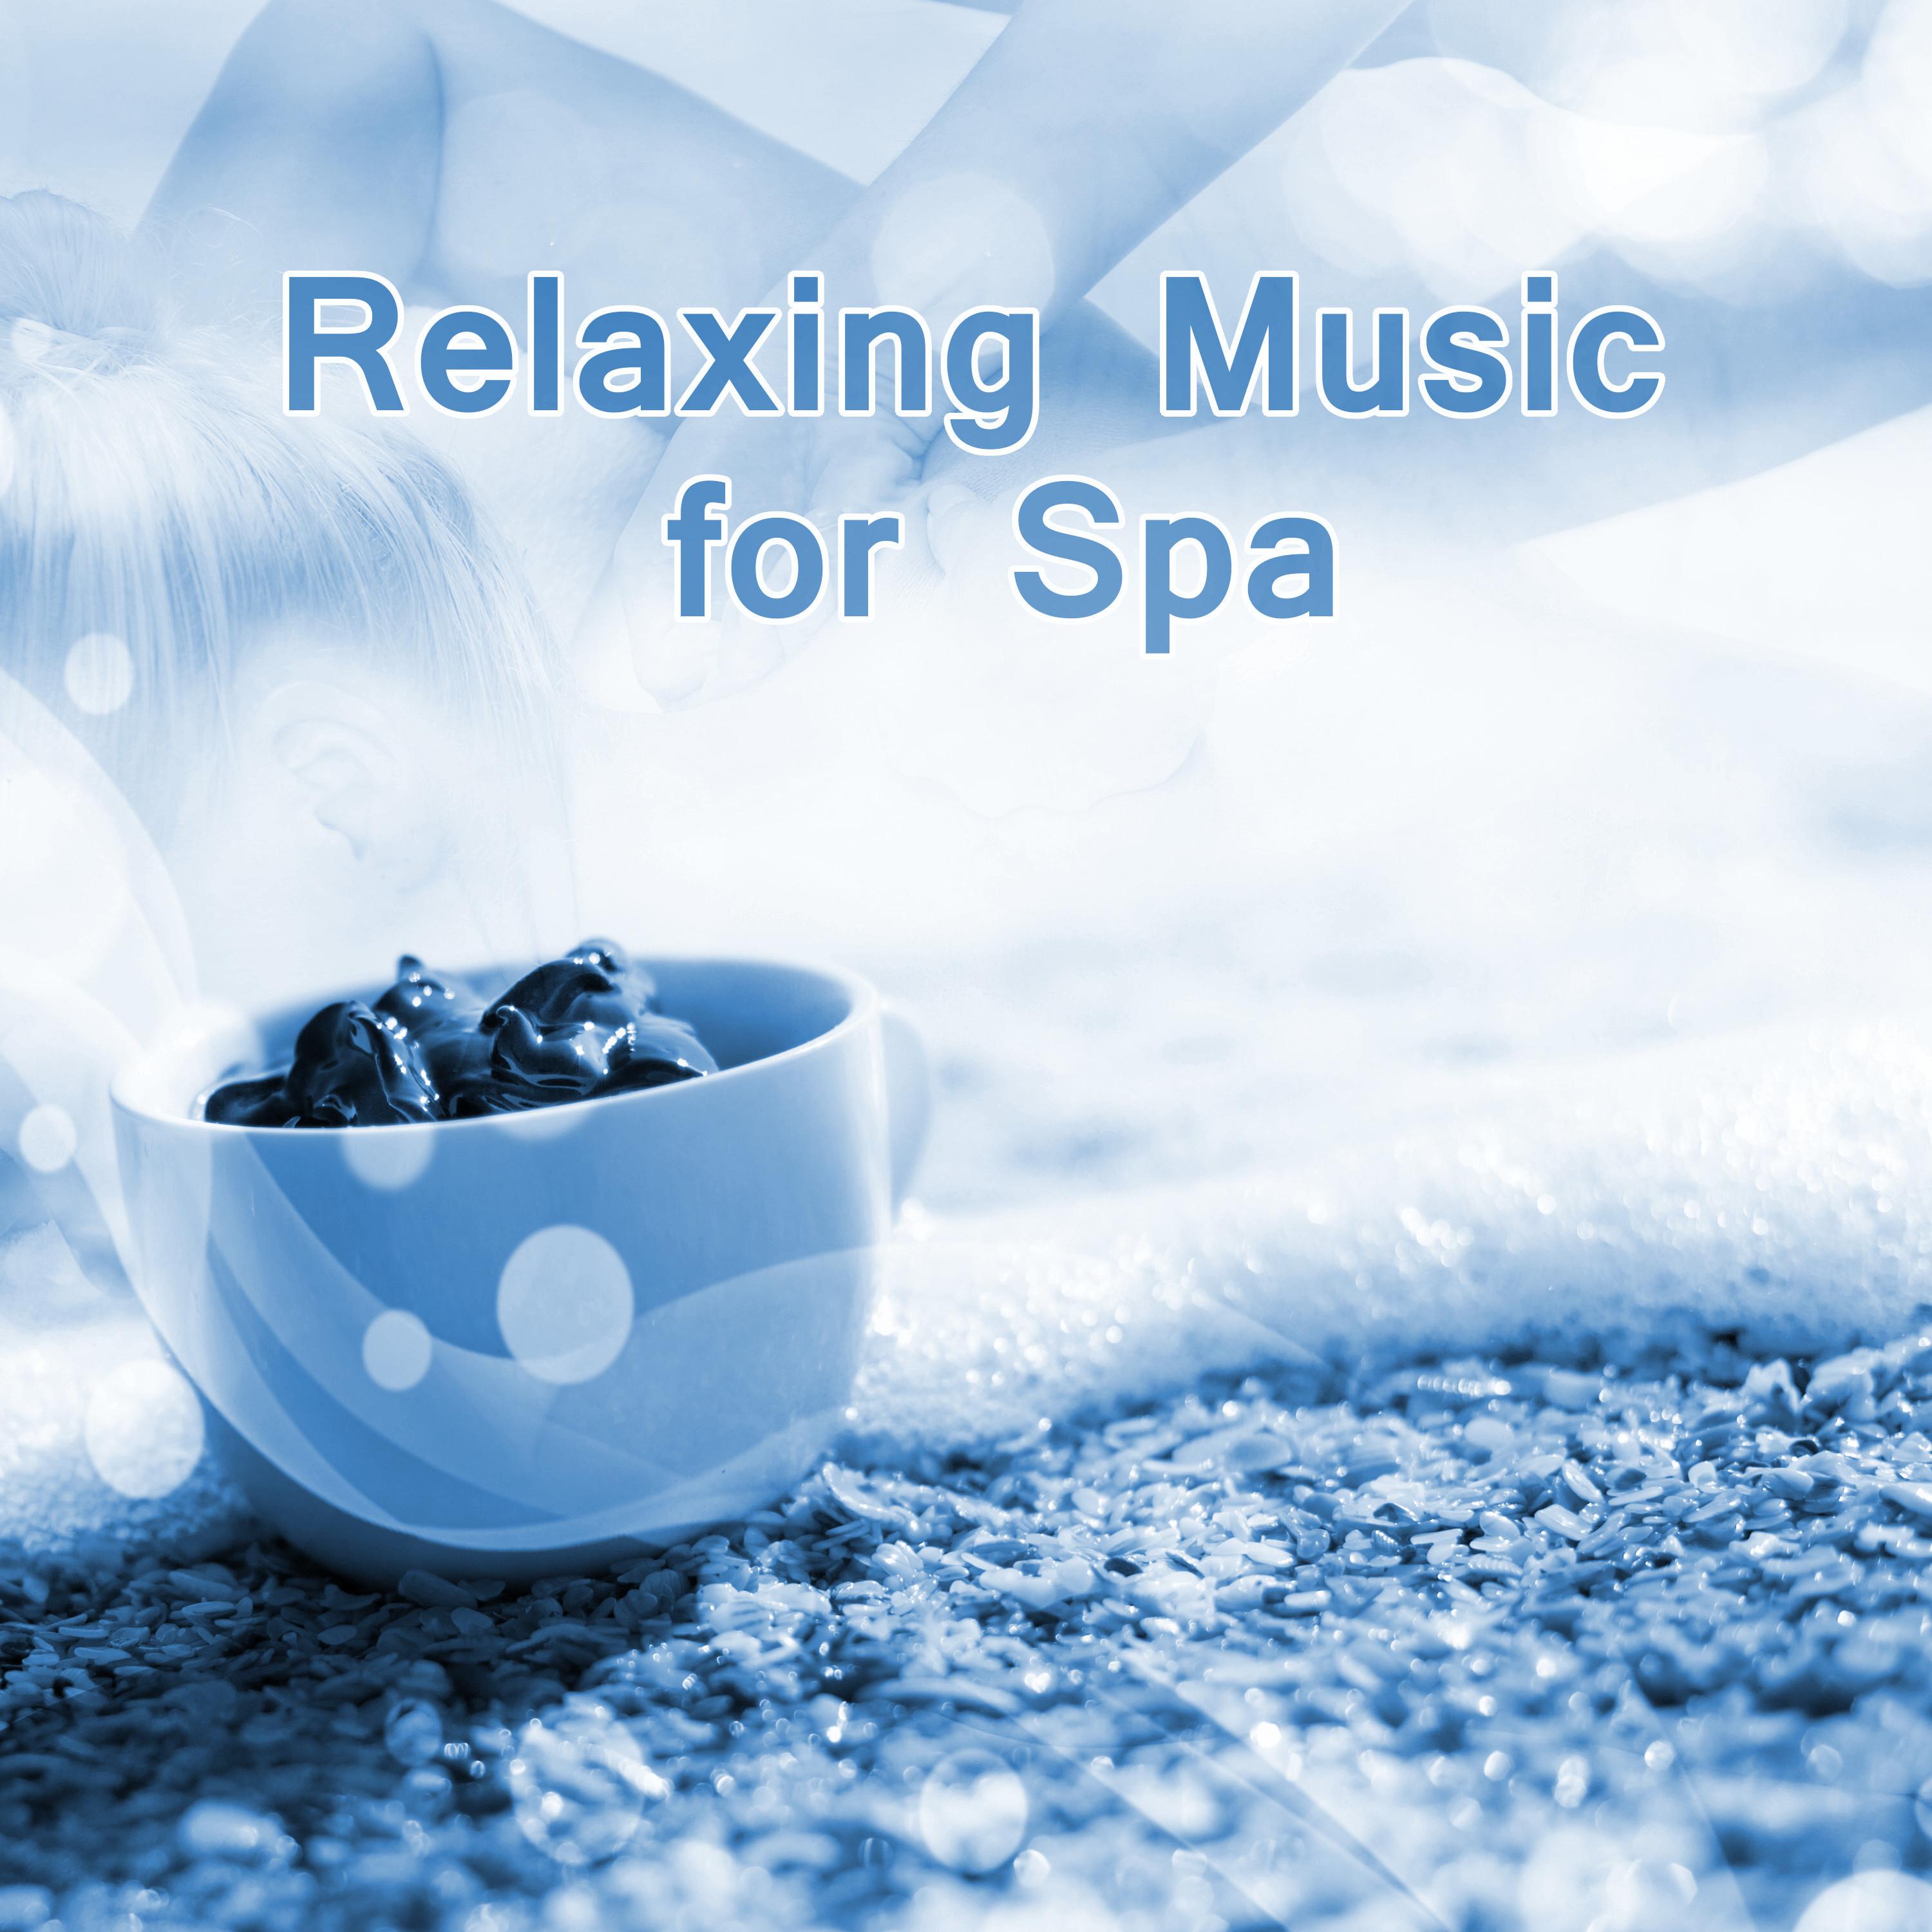 Relaxing Music for Spa – Soothing Waves, Beautiful Spa Music, Relaxing Massage, Sauna Relaxation